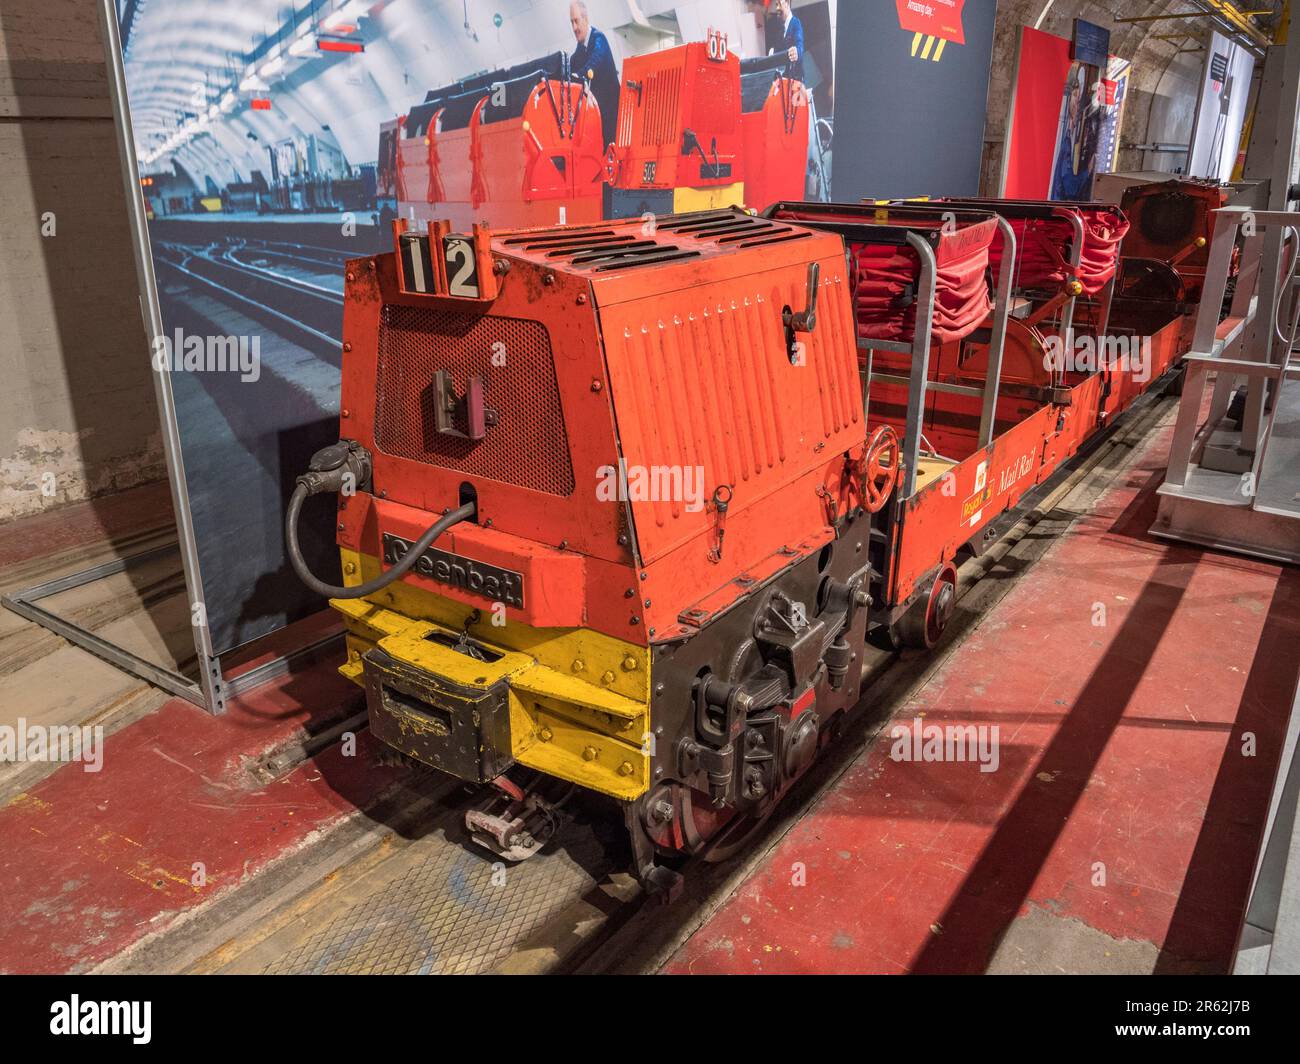 A 1980's rail car used to transport mail on display in the Mail Rail Museum in London, UK. Stock Photo